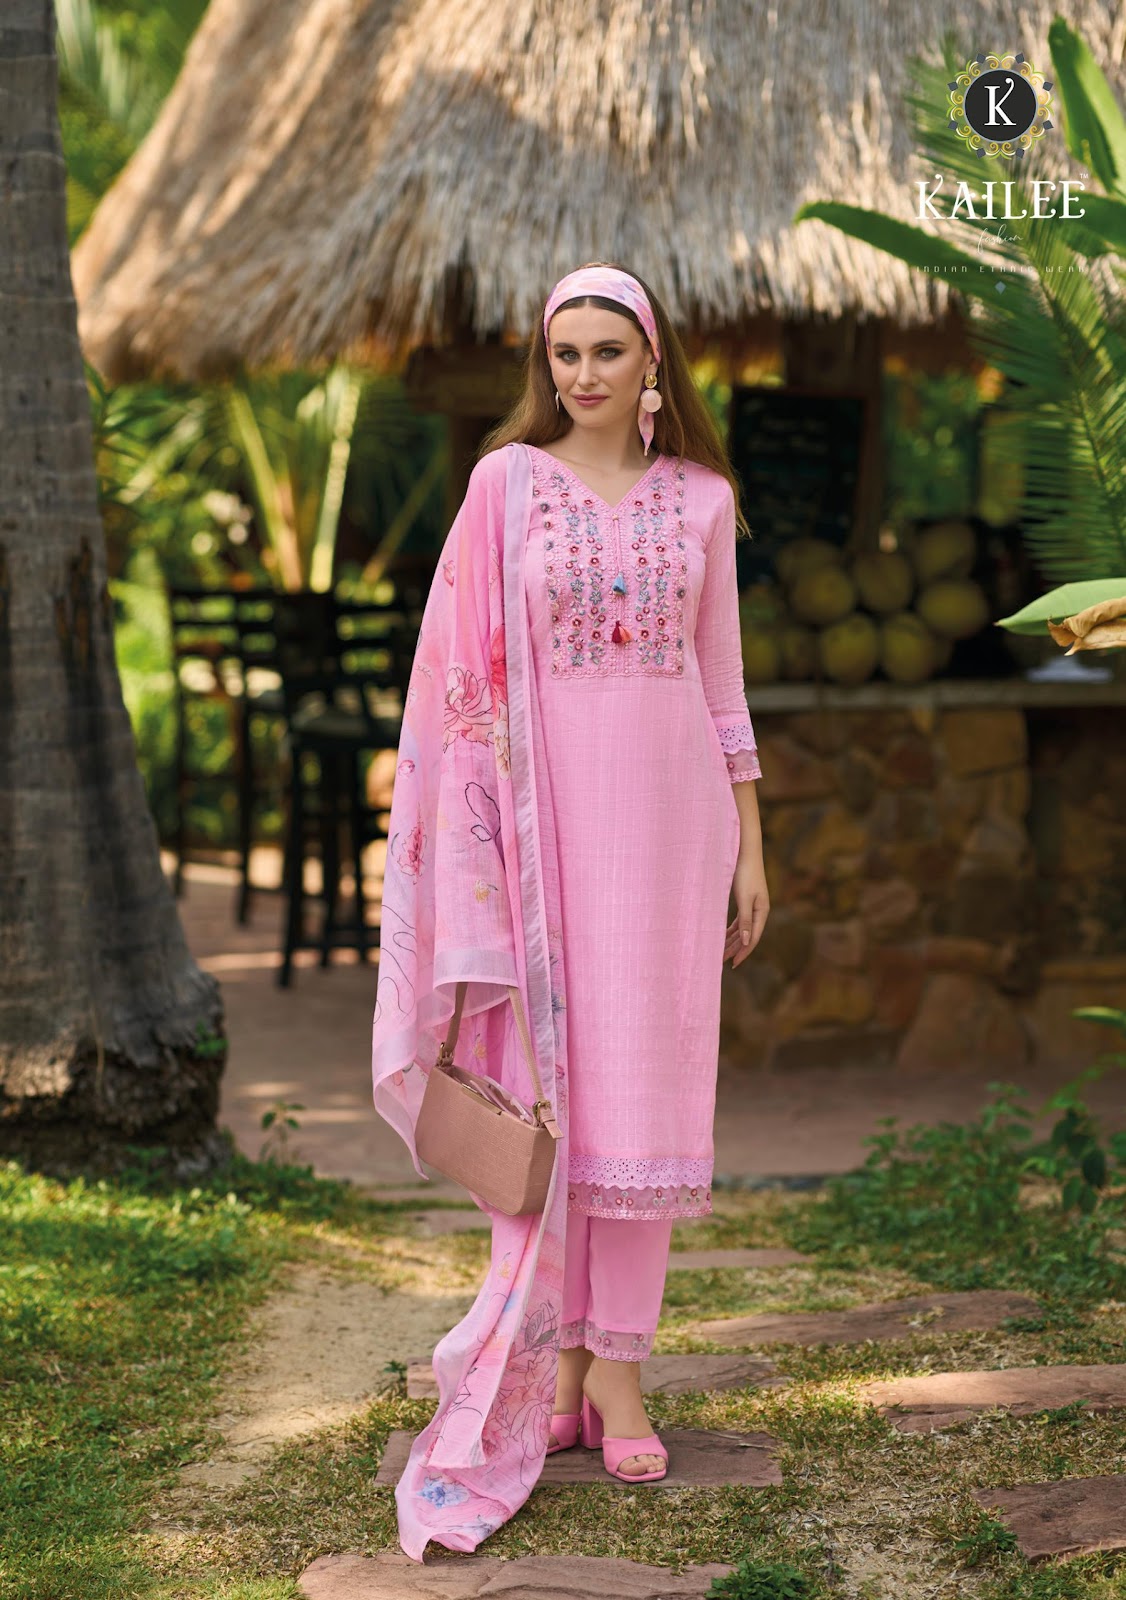 Summer Garden Kailee Fashion Cotton Readymade Pant Style Suits